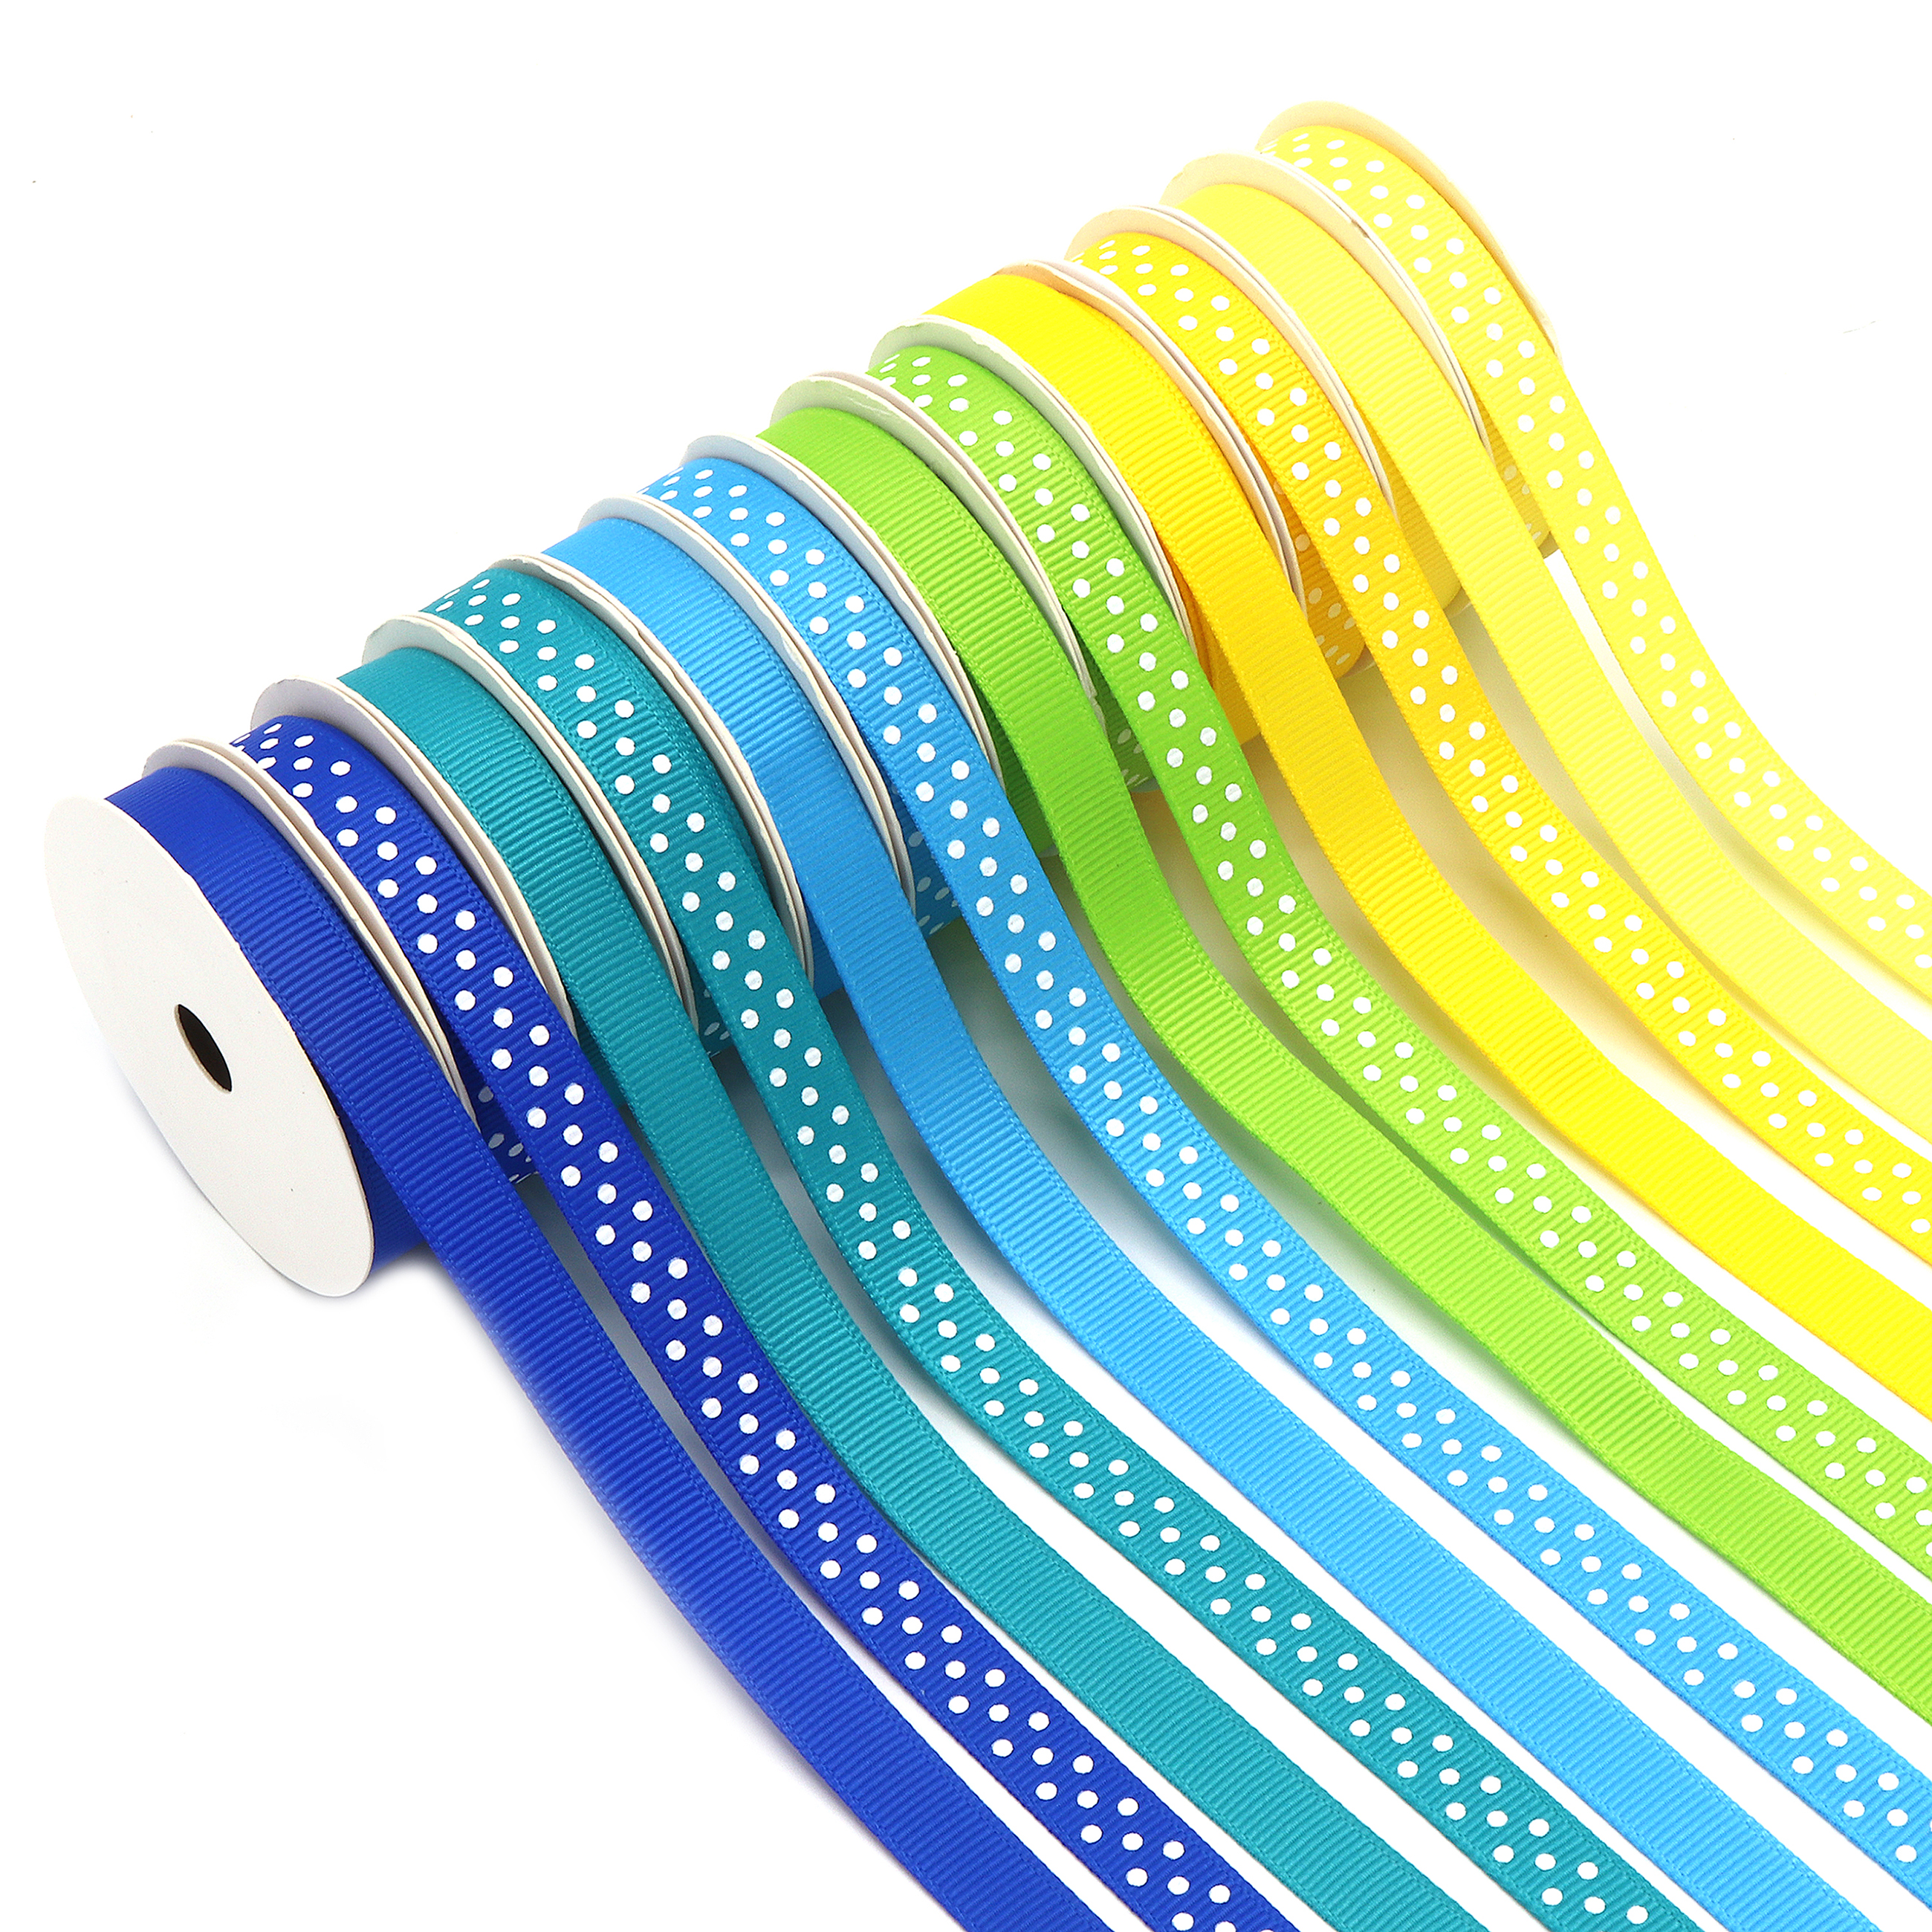 Solid and Polka Dot Grosgrain Ribbon Pack, 24 Bright Colors, 3/8" x 48 Yards by Gwen Studios - image 4 of 7